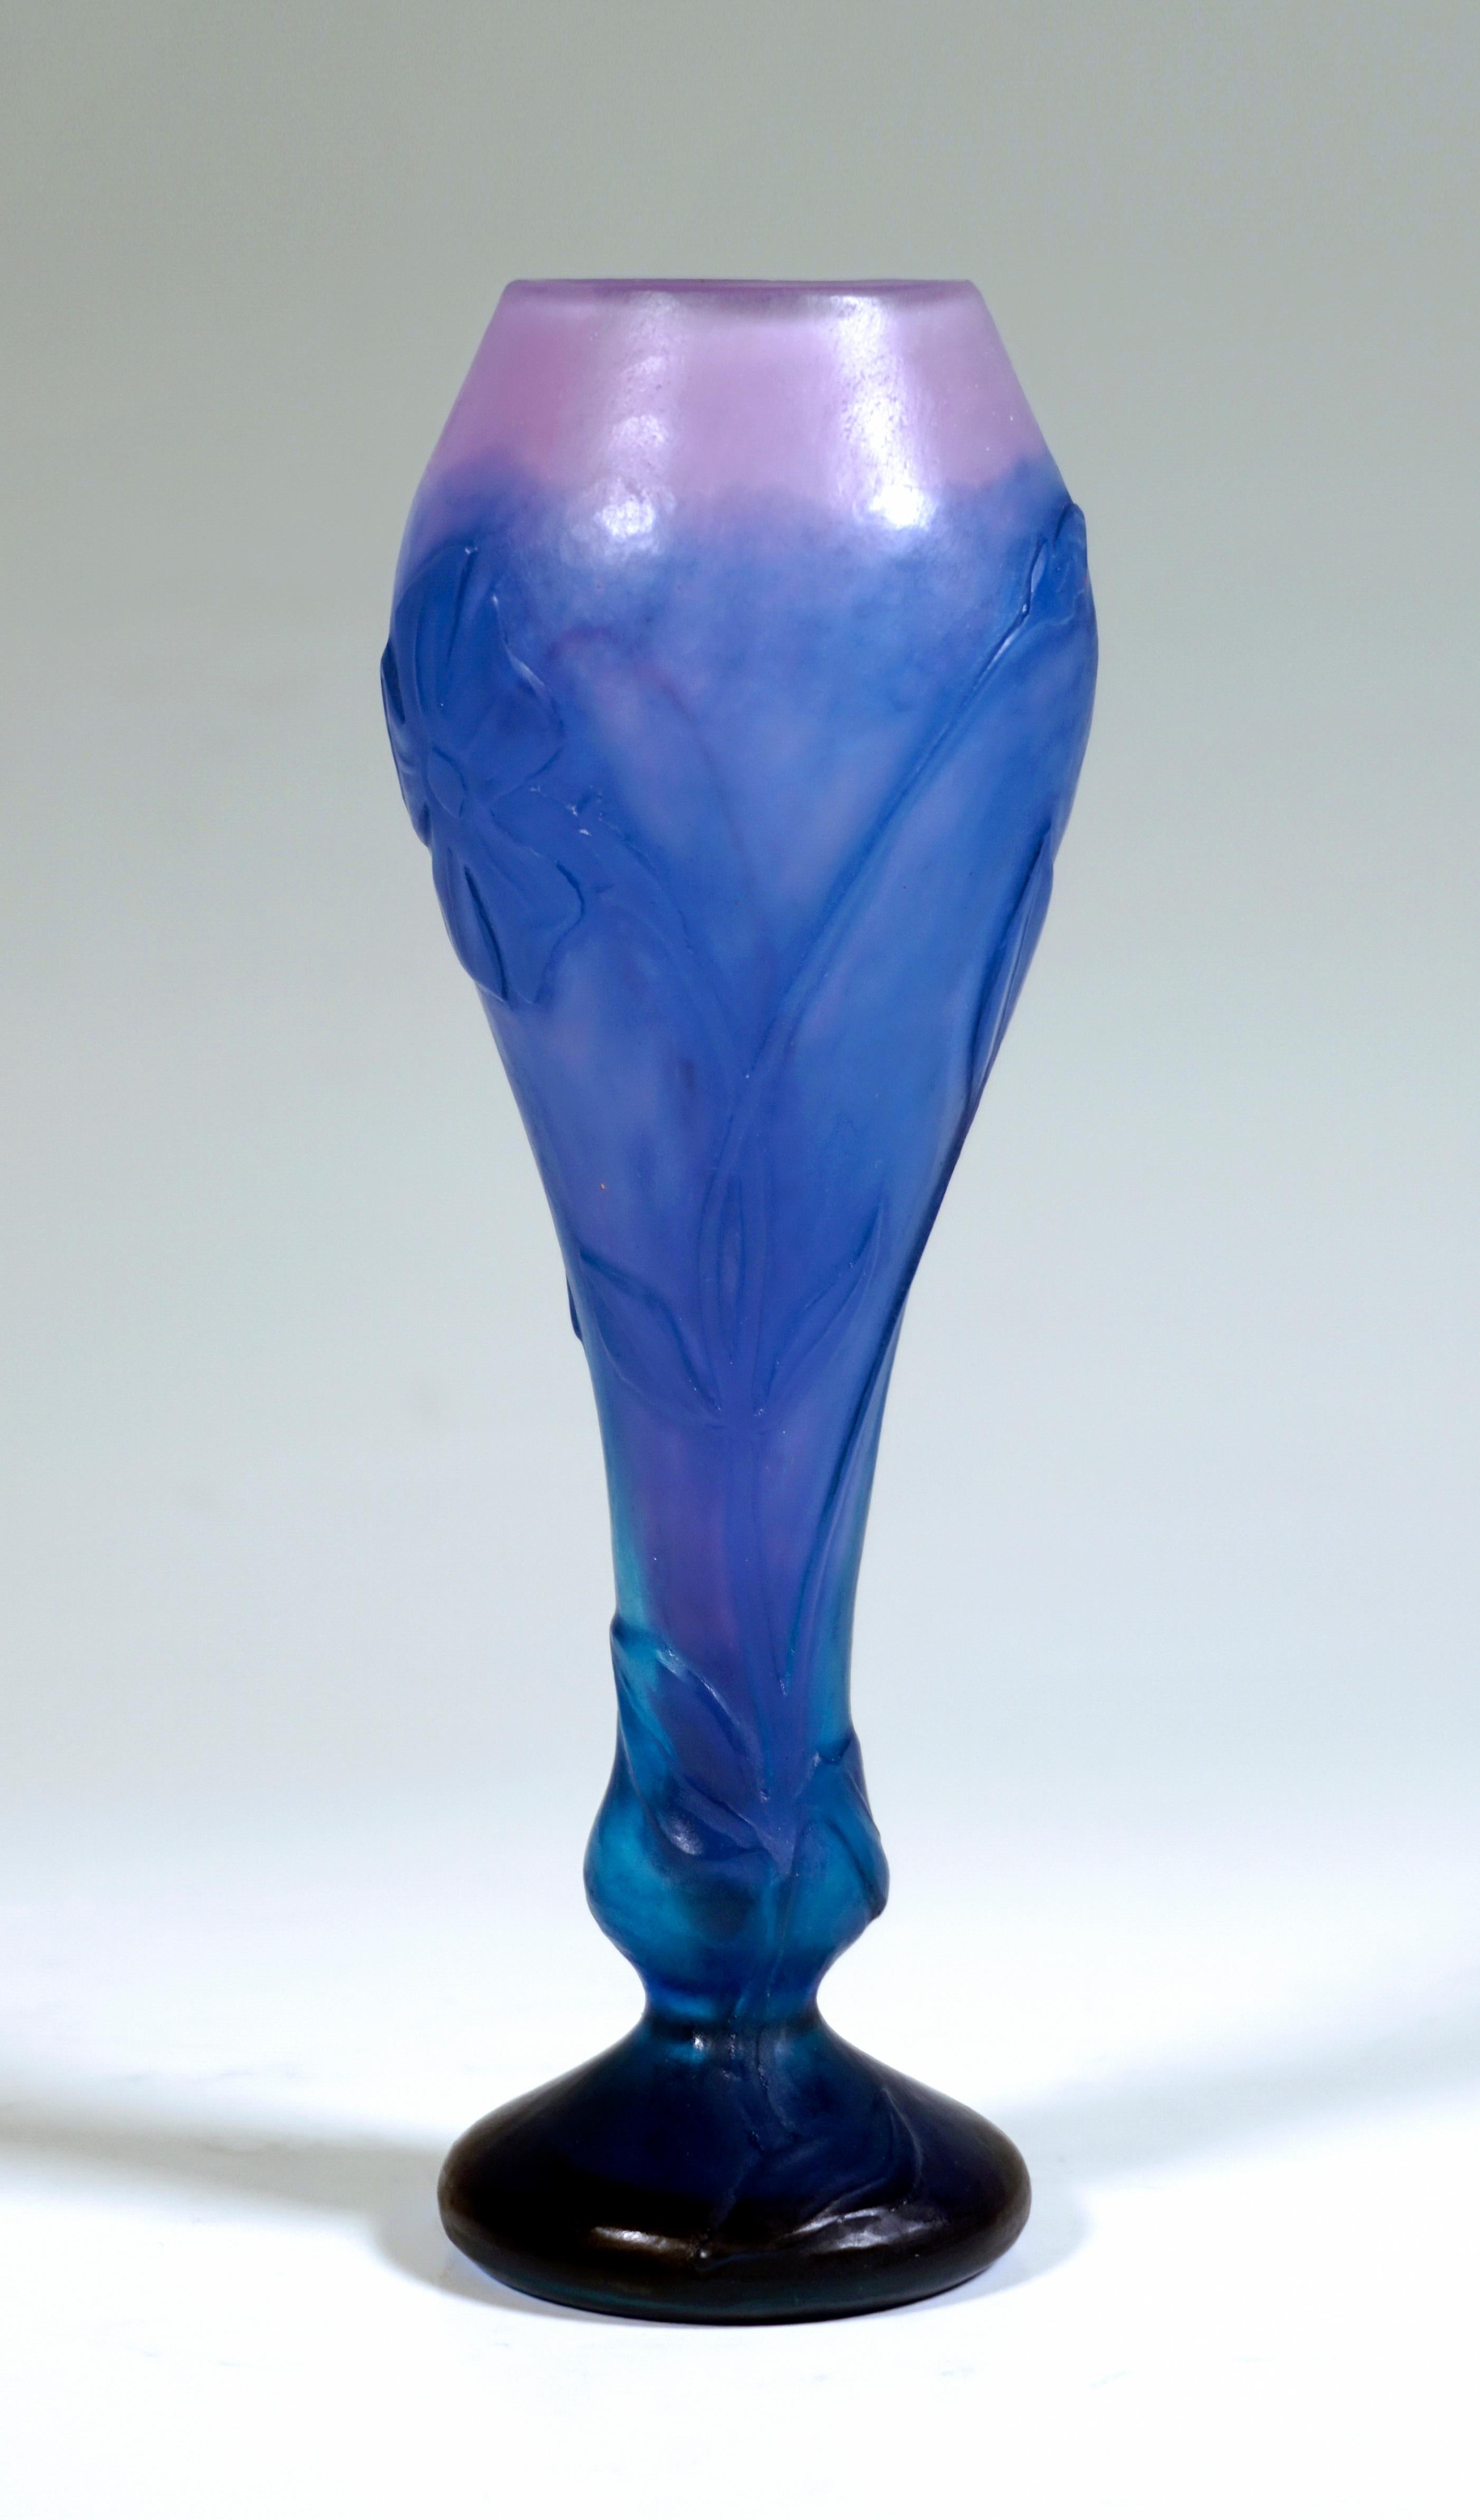 Very rare and exceptional piece of Art Nouveau glass:
Small baluster-shaped vase on a separate stand, forming a small bulge, slender, slowly bulging towards the top and tapering towards a narrowed opening. Colorless glass with colored powder fused